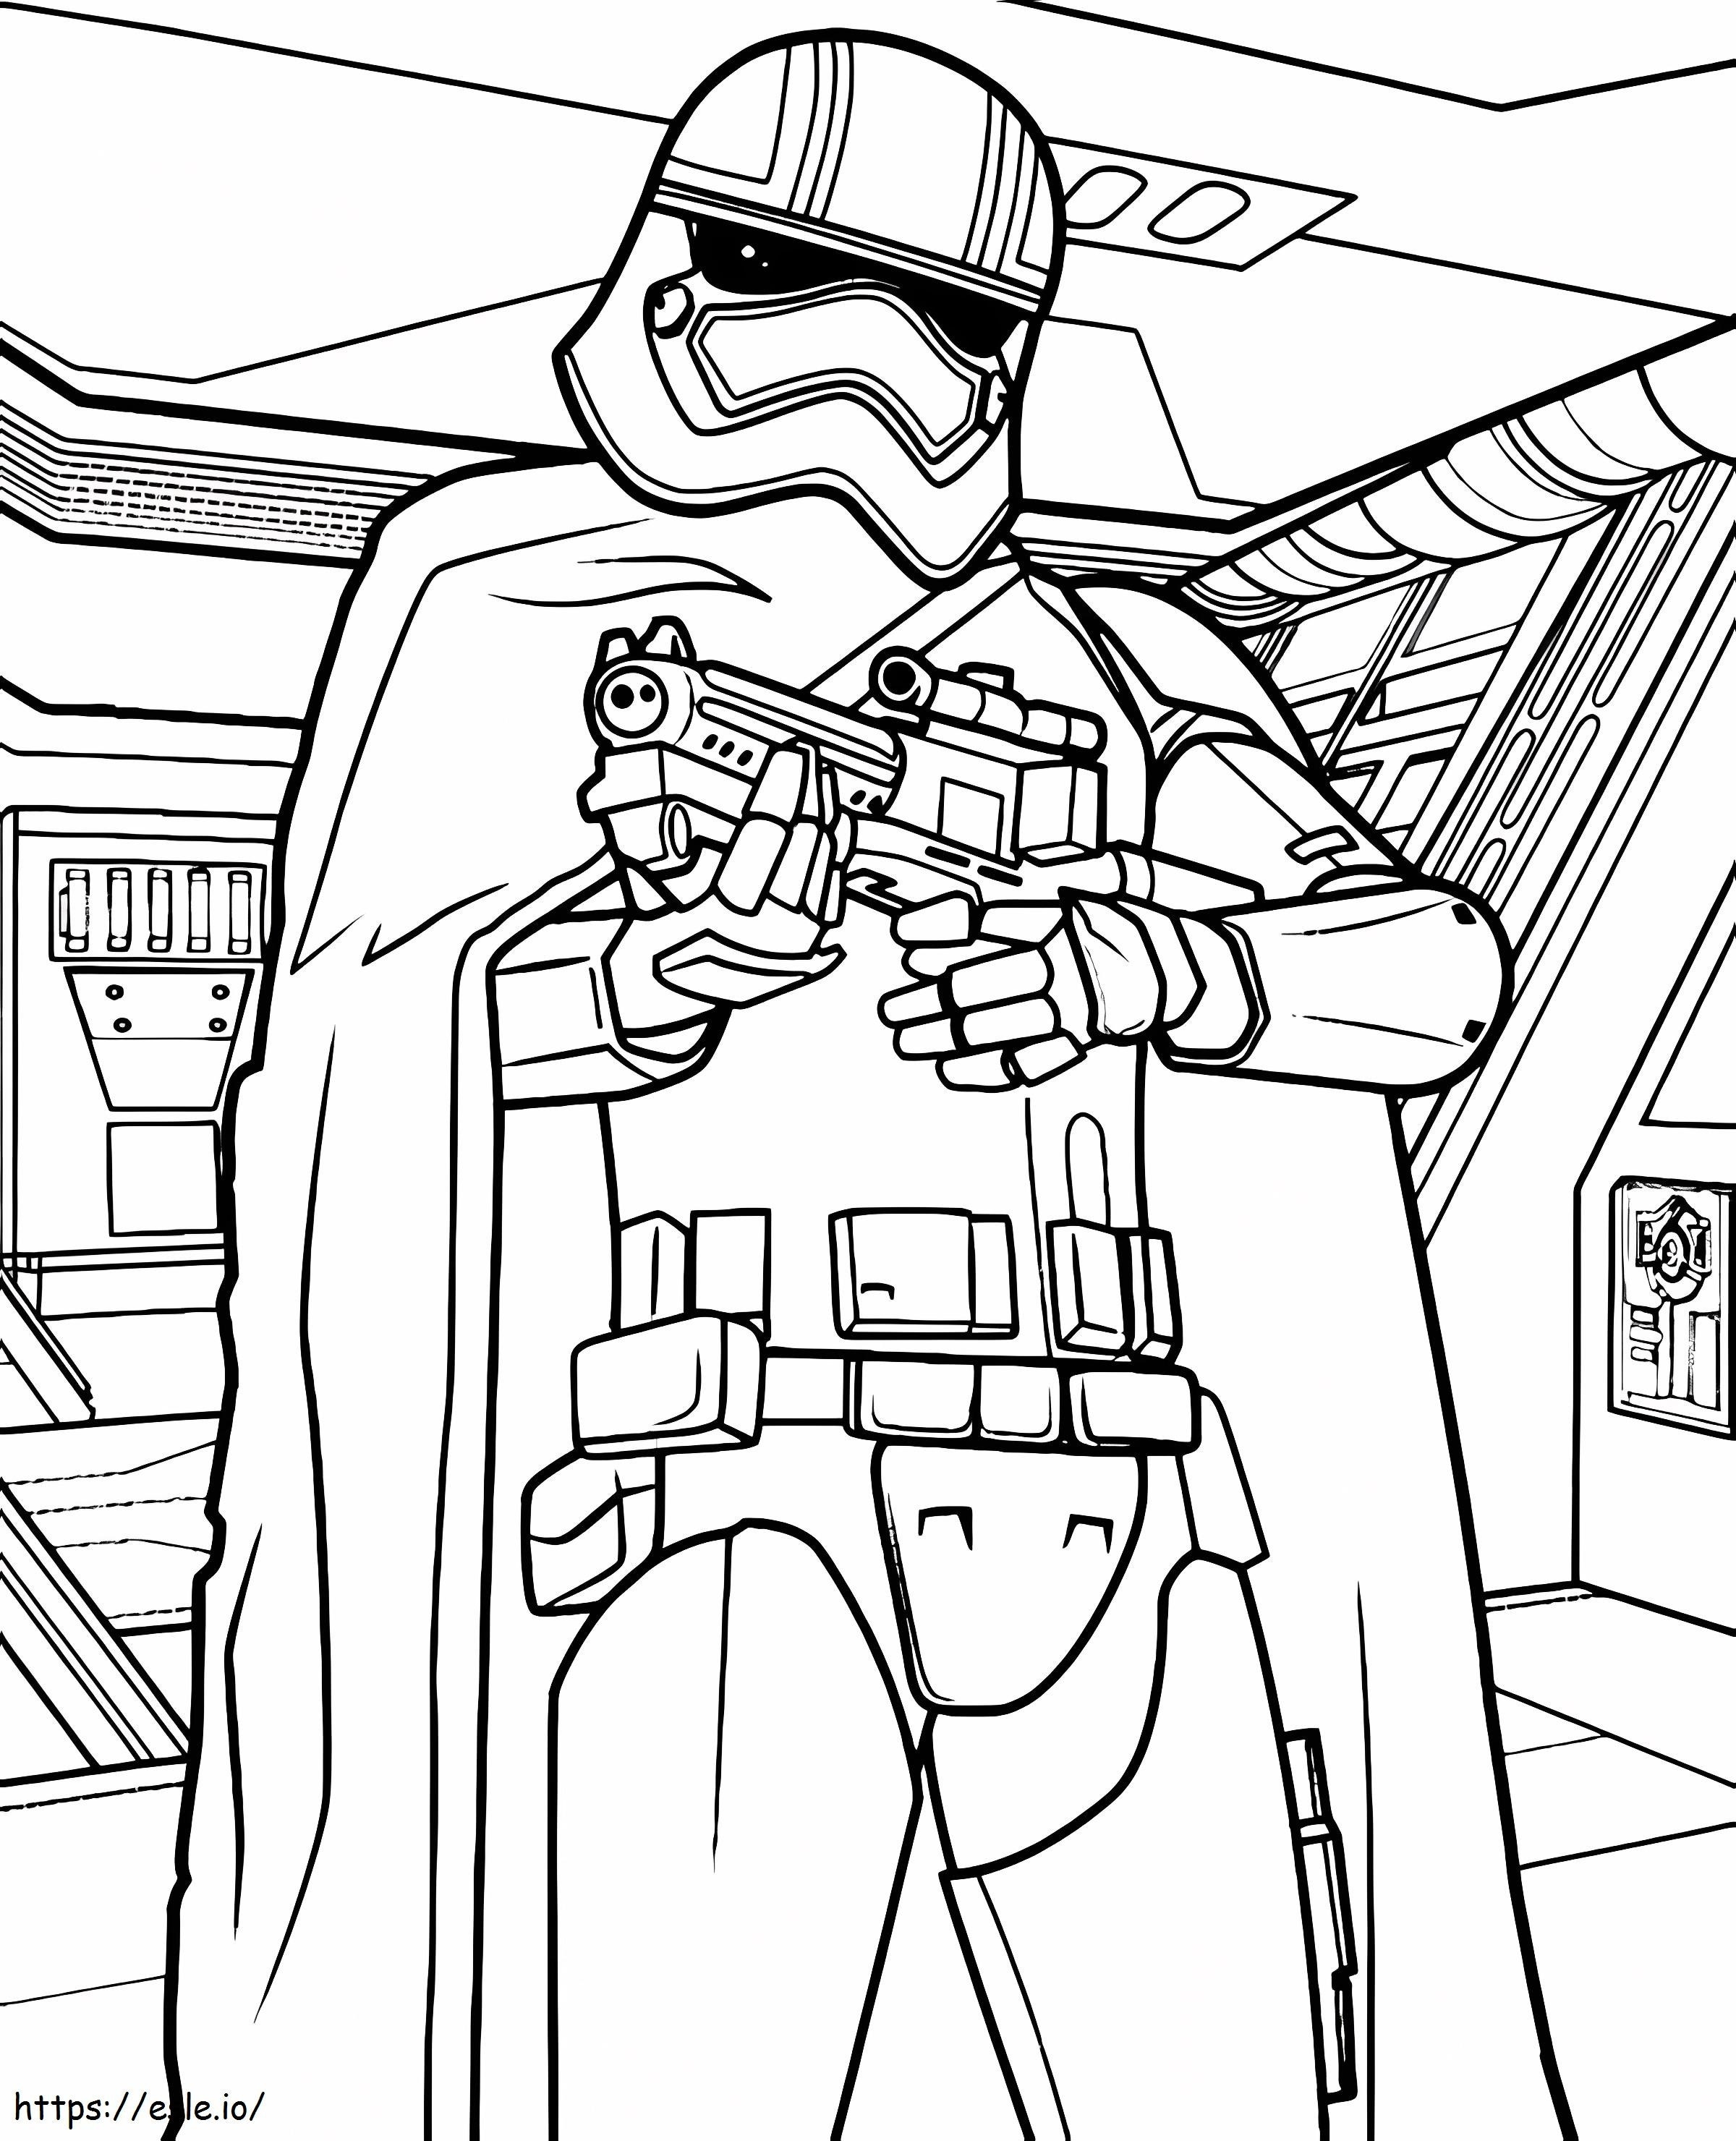 Stormtrooper 7 coloring page